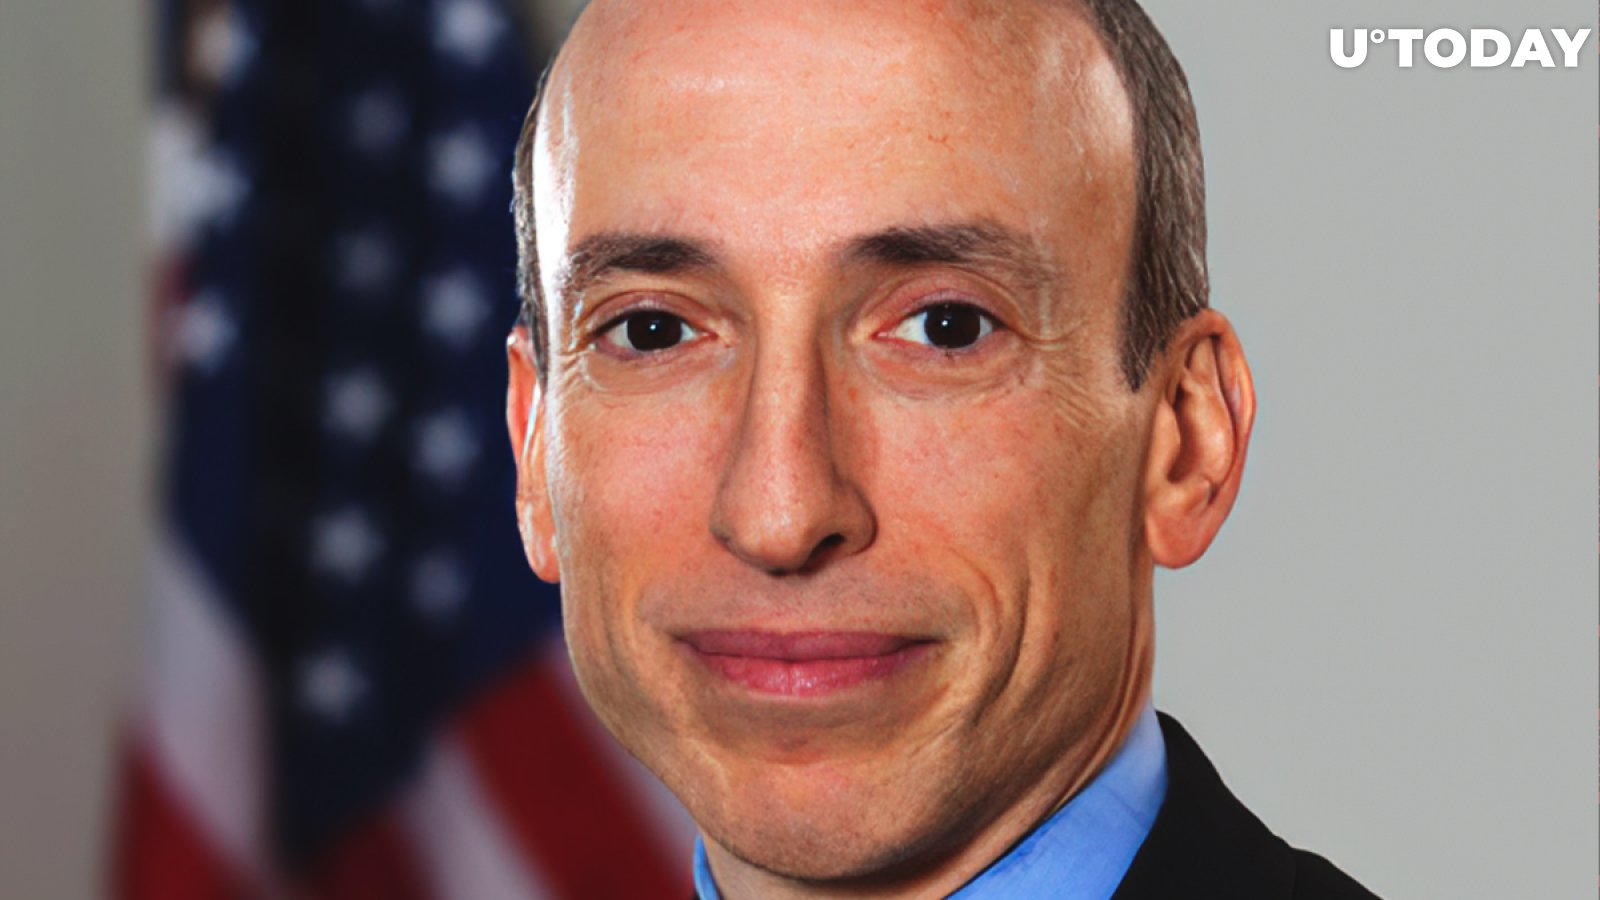 SEC Chair Nominee Gensler Calls Cryptocurrencies "Catalyst for Change" During Confirmation Hearing   